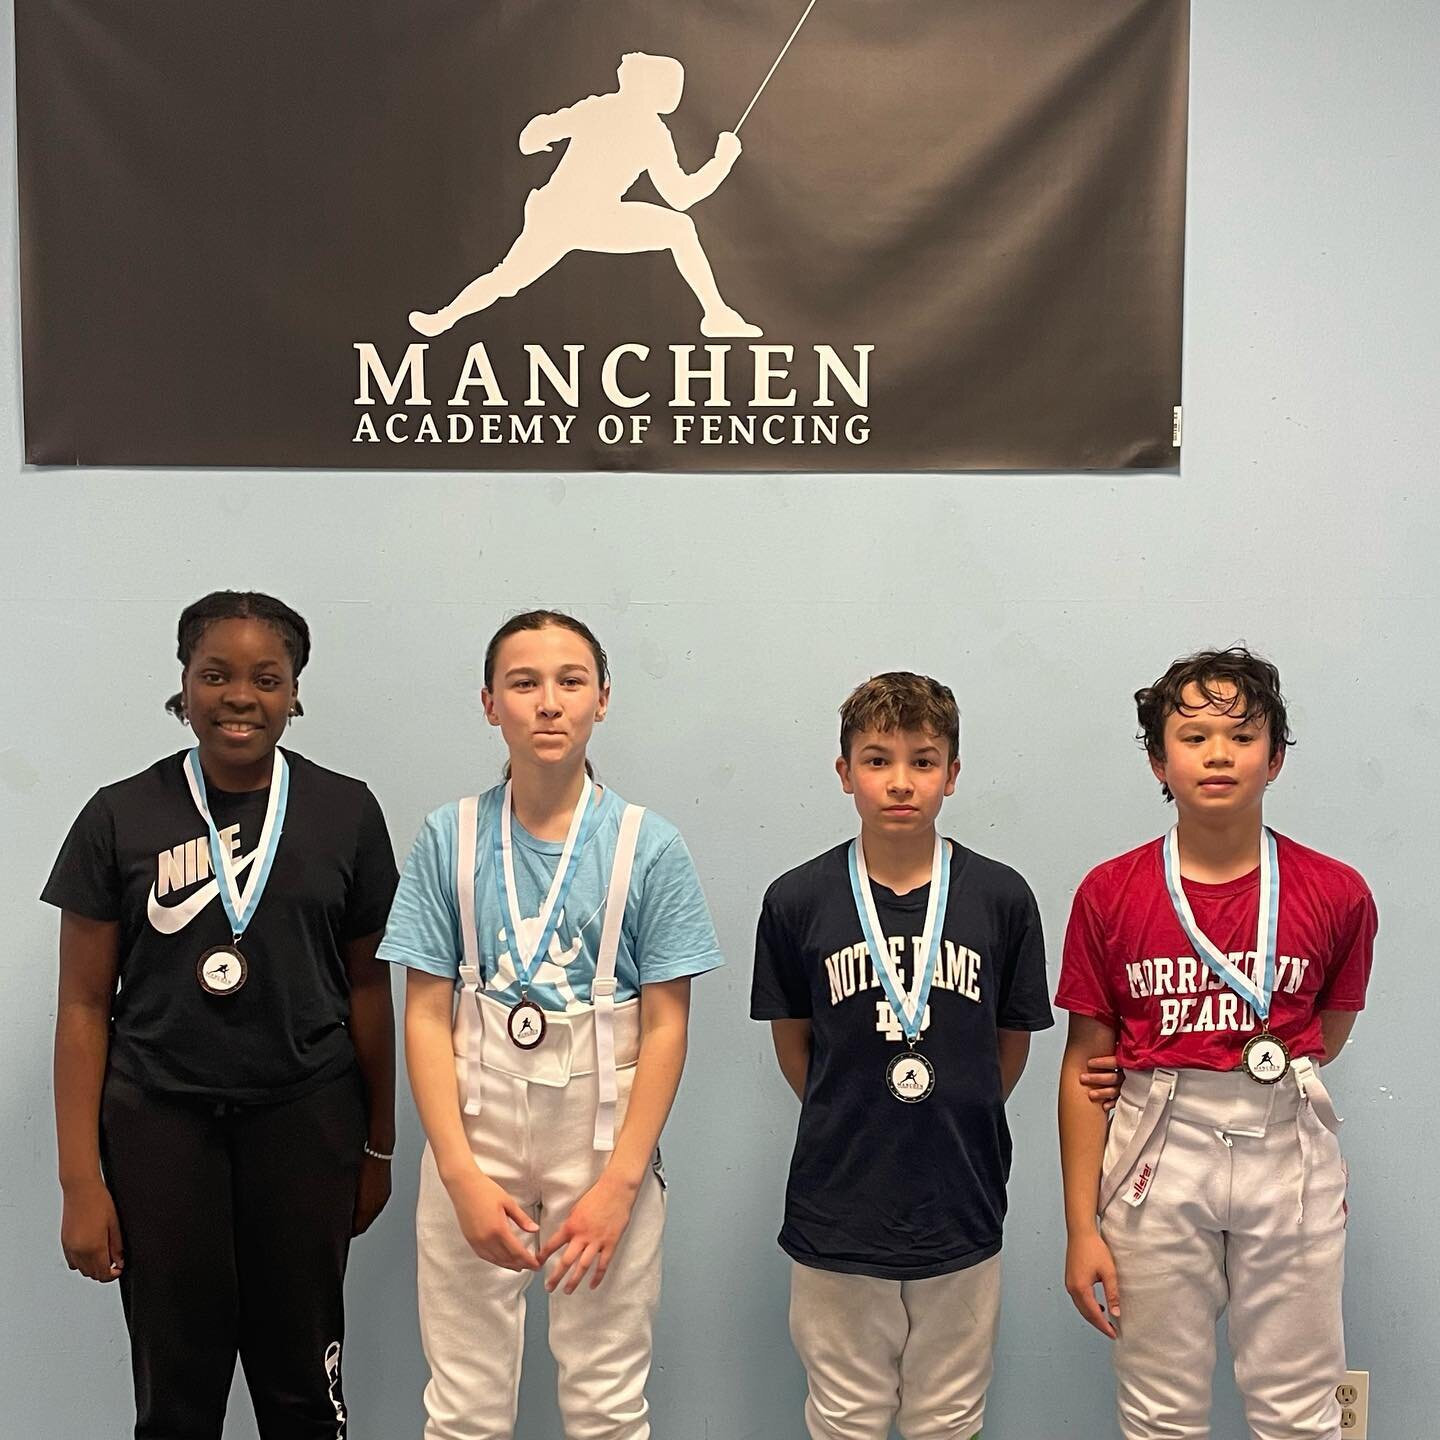 Congratulations to our winners in the MAF Y14. Jacob Wong placed 🥇, Harrison Kovacs placed 🥈 with Brooke Eyer and Jadesola Olawoye tying for 🥉. Awesome job everyone!